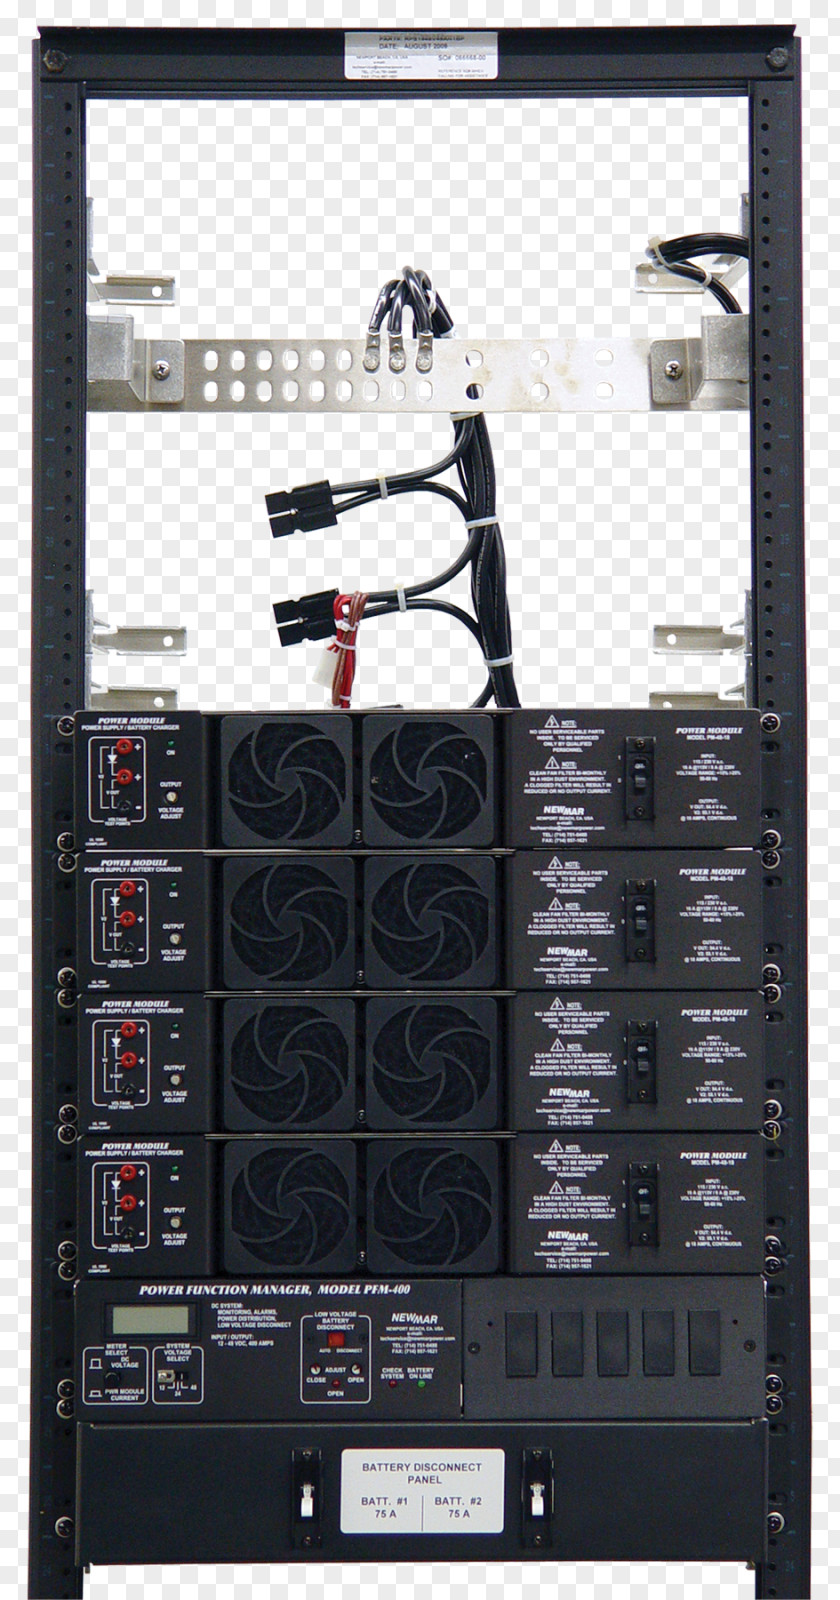 Computer Cases & Housings Electric Power System 19-inch Rack PNG